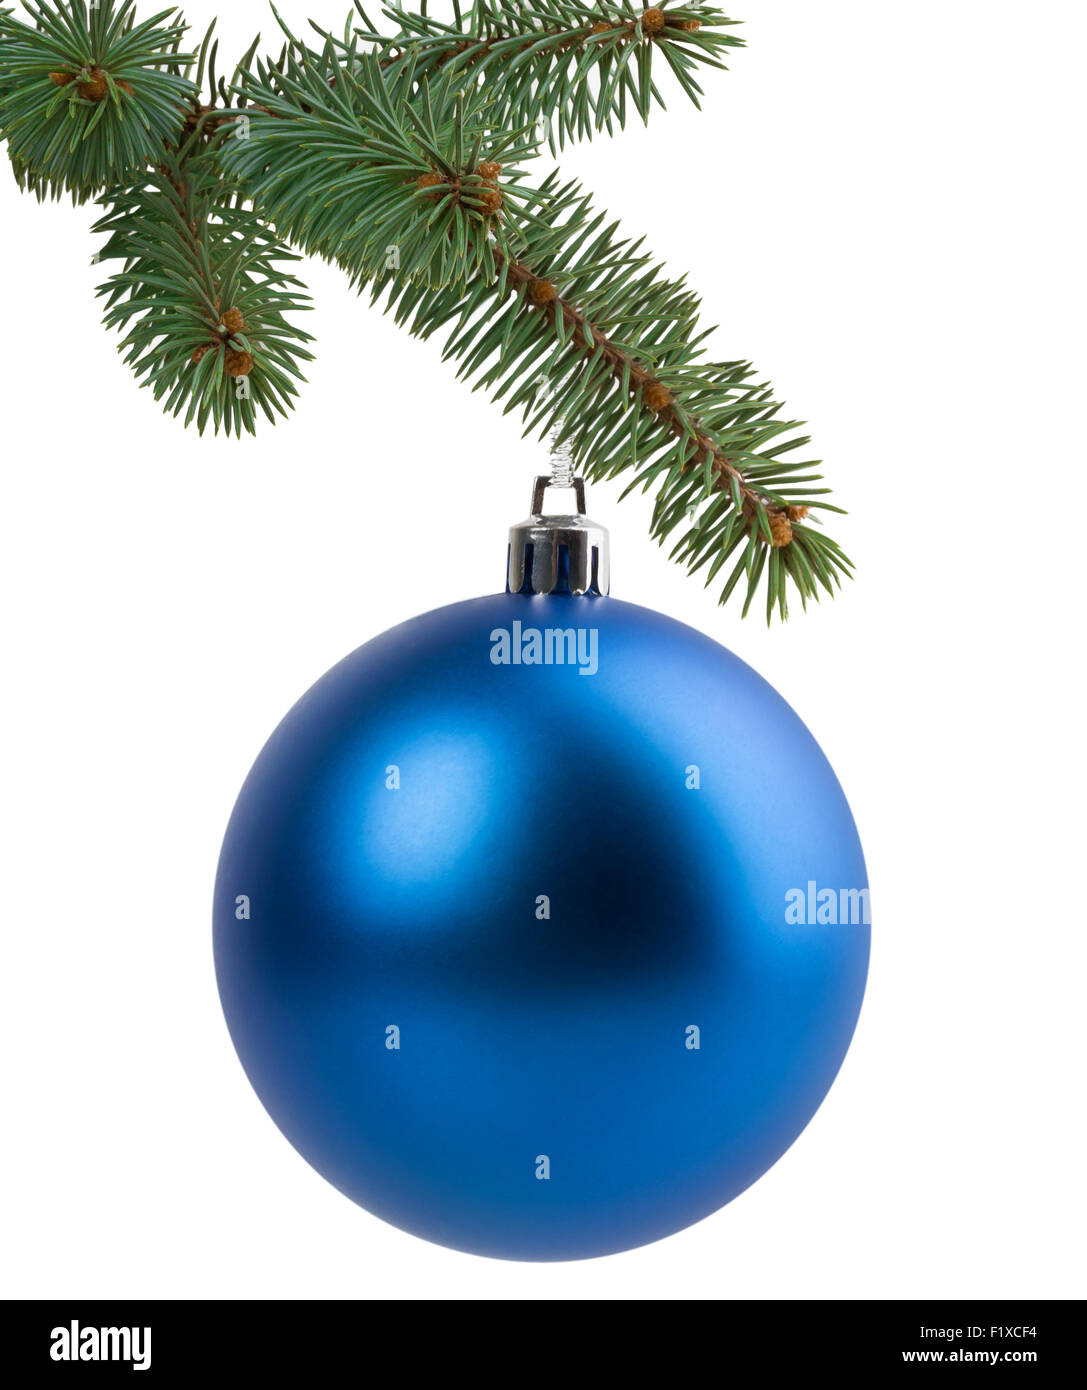 Christmas tree branch with a blue ball. Stock Photo